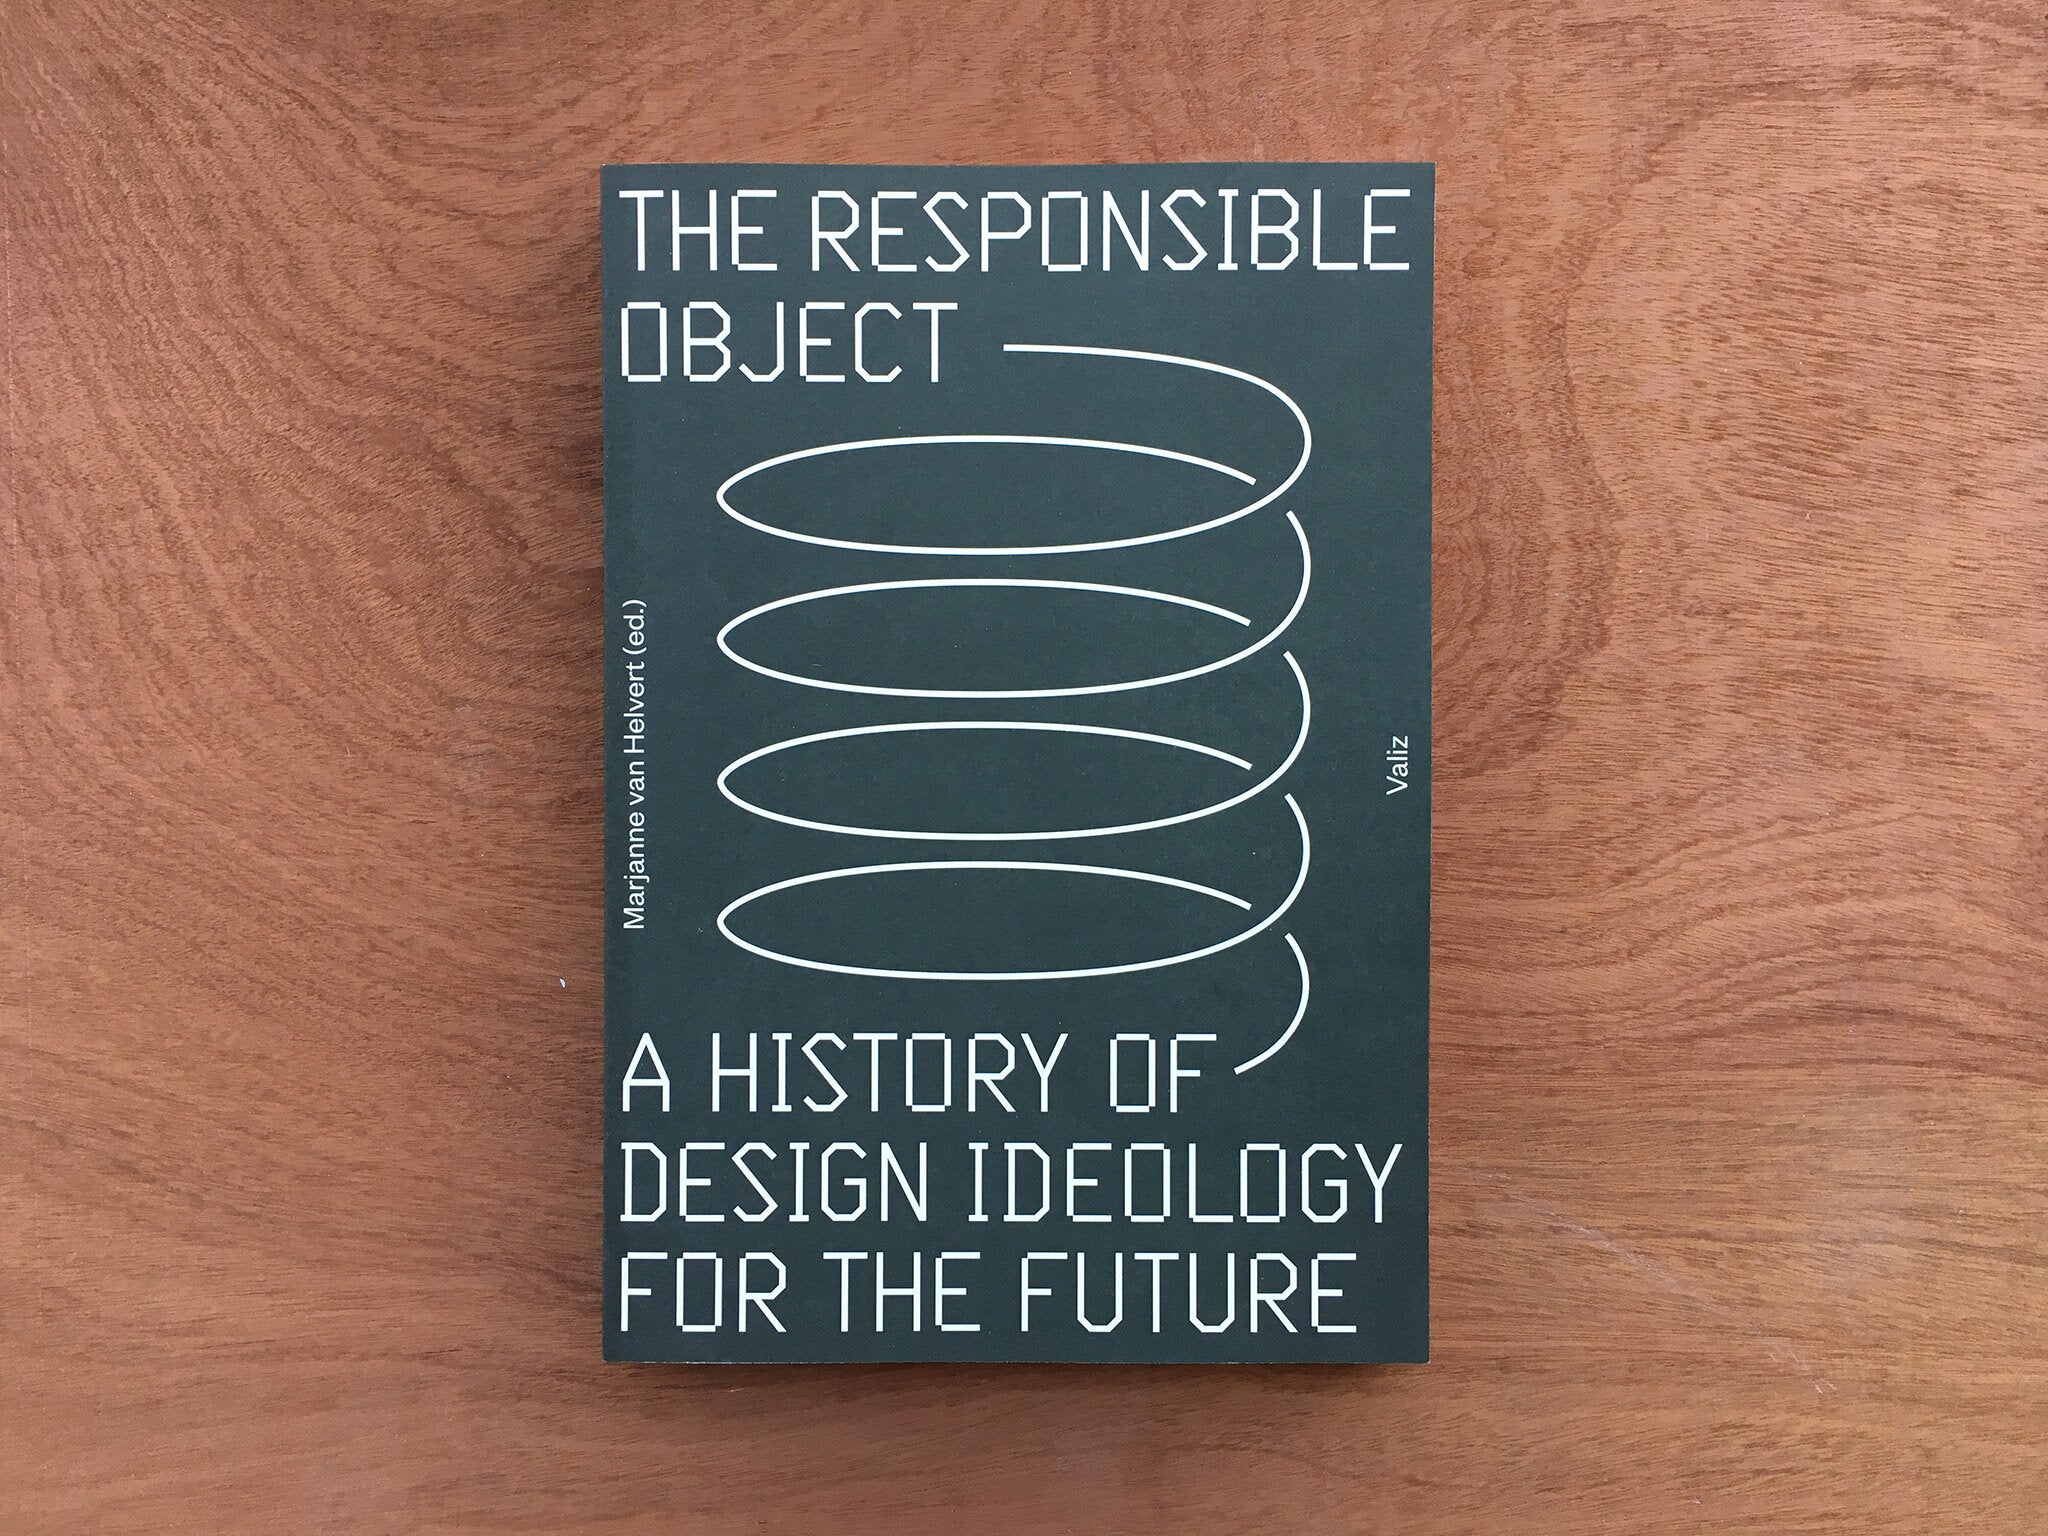 THE RESPONSIBLE OBJECT: A HISTORY OF DESIGN IDEOLOGY FOR THE FUTURE  by Marjanne van Helvert